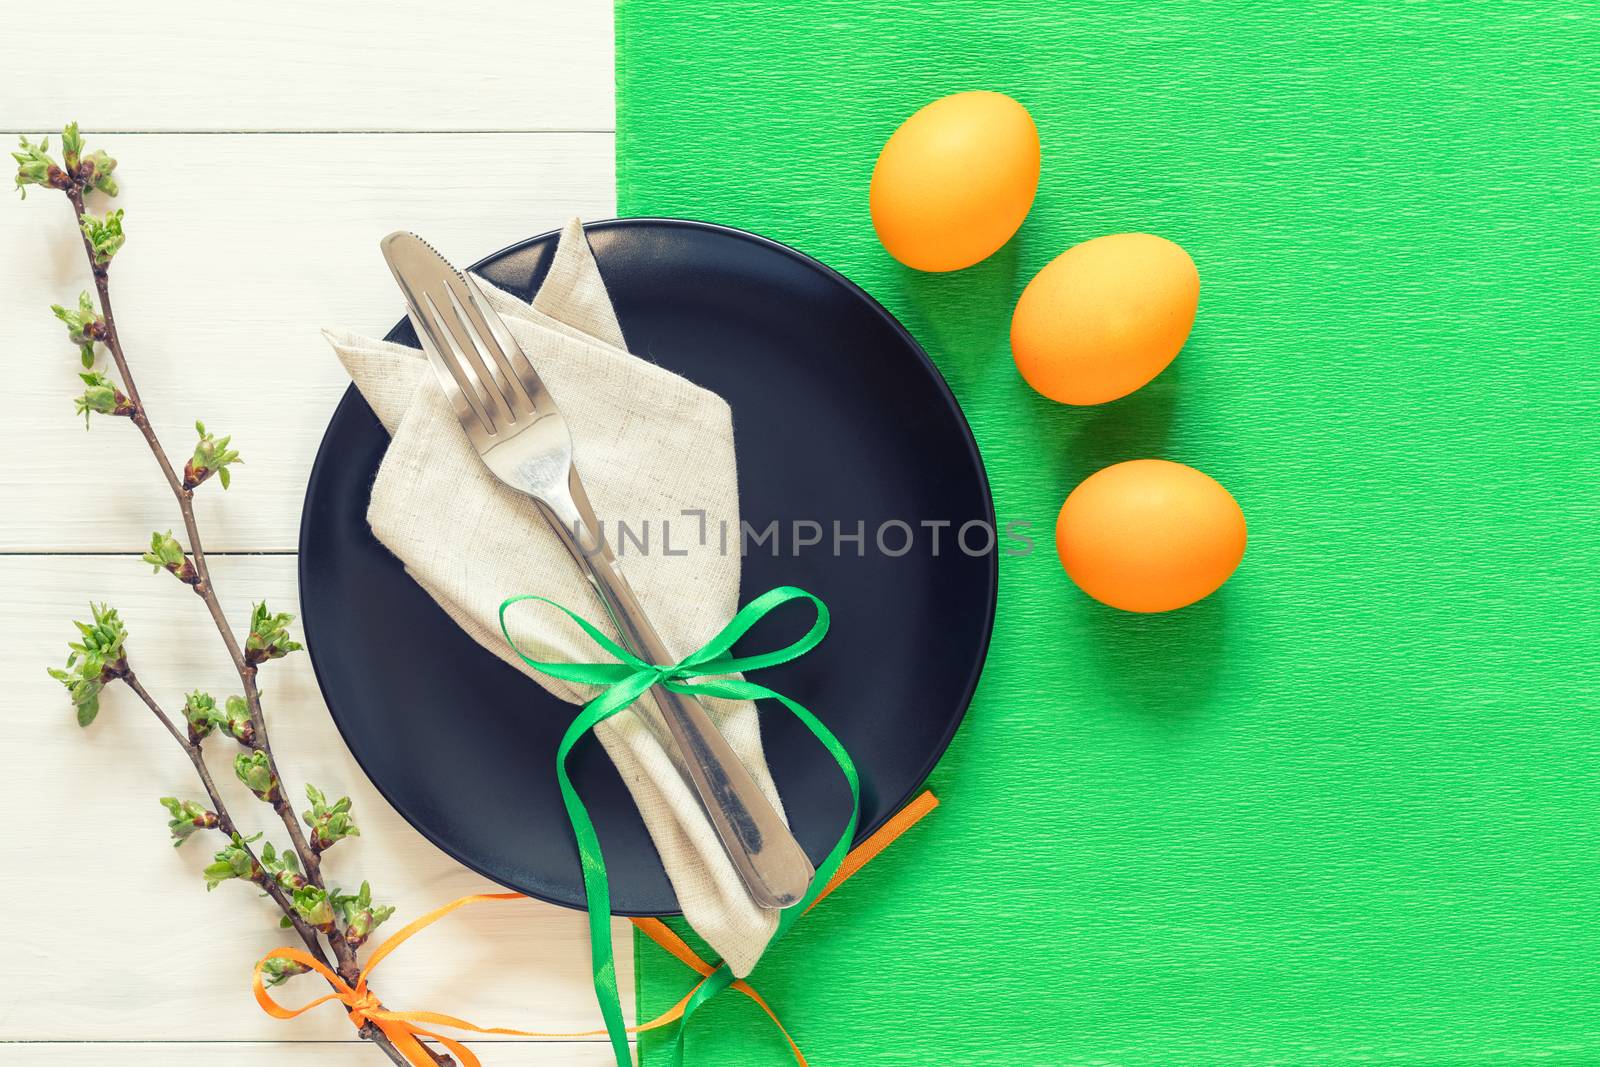 Easter table setting with spring flowers and cutlery. Rustic green table cloth on white wood background. Holidays background with copy space.